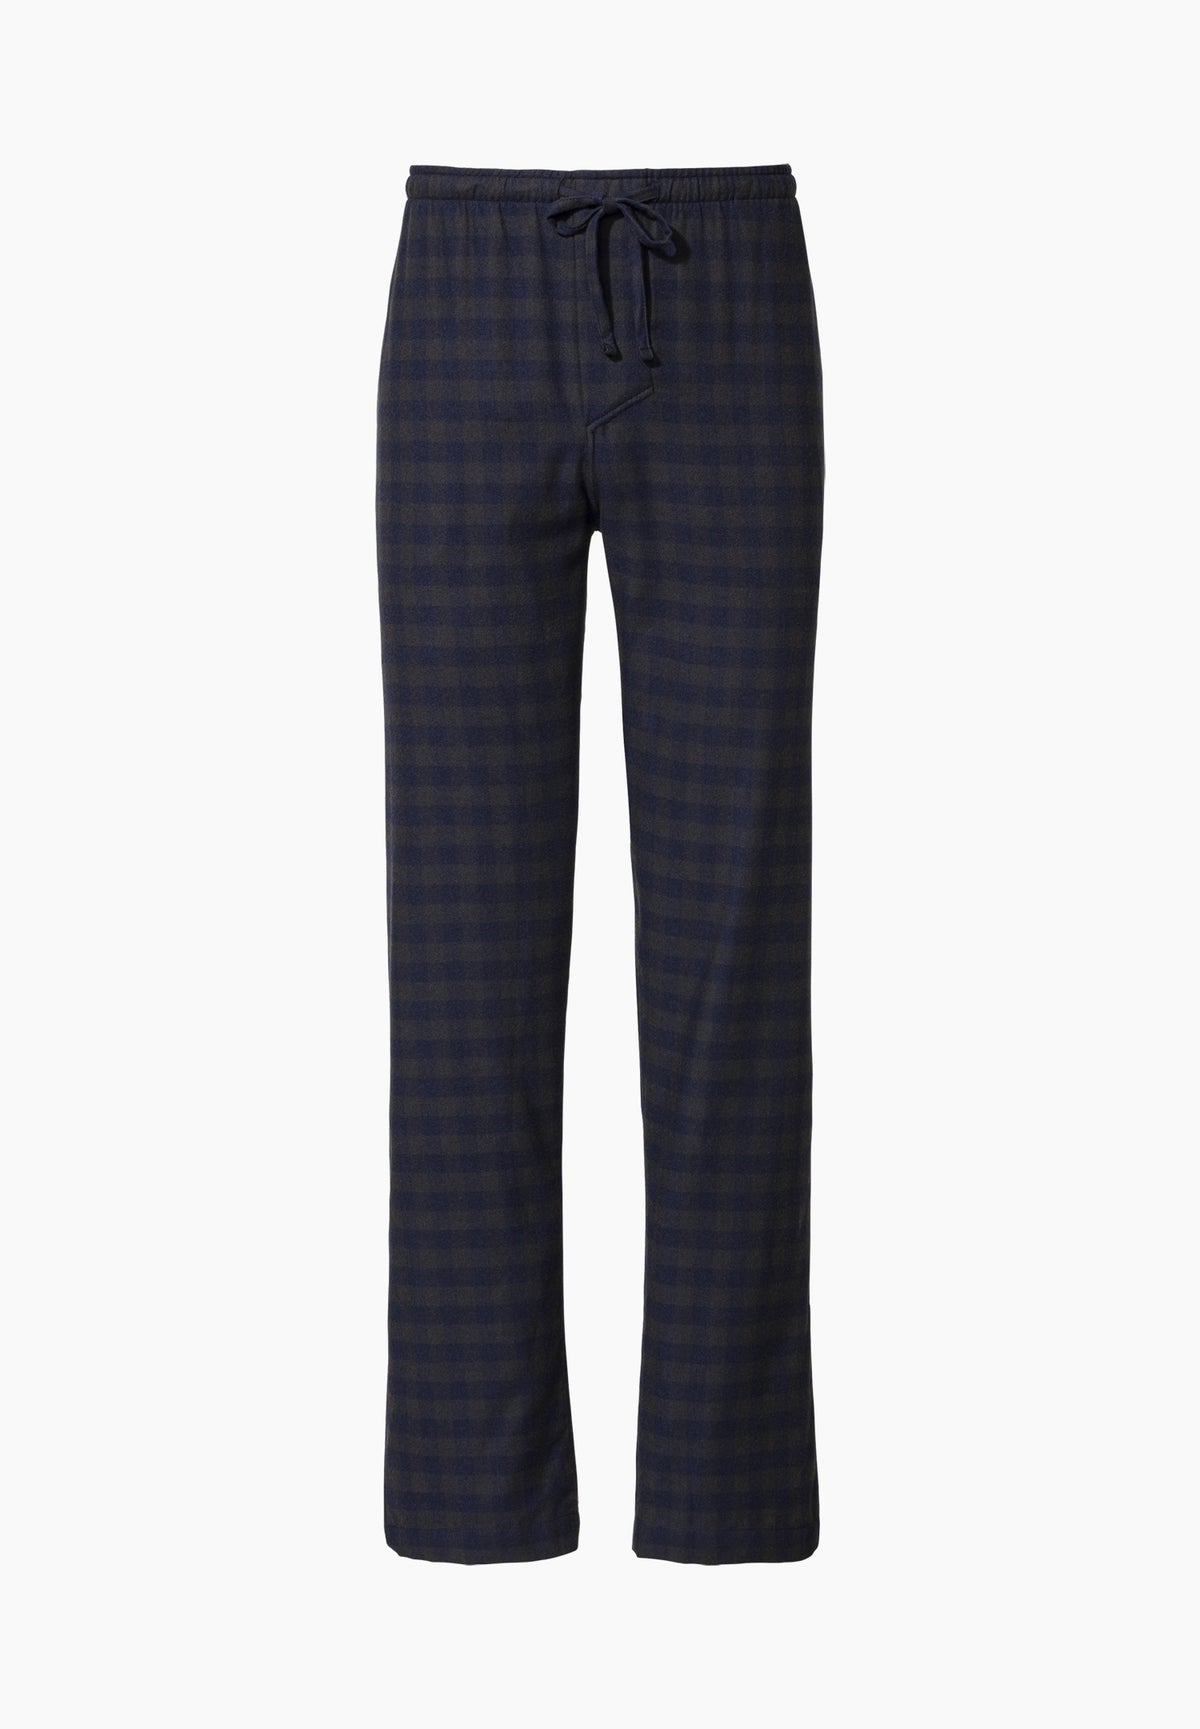 Cozy Flannel | Hose lang - navy check